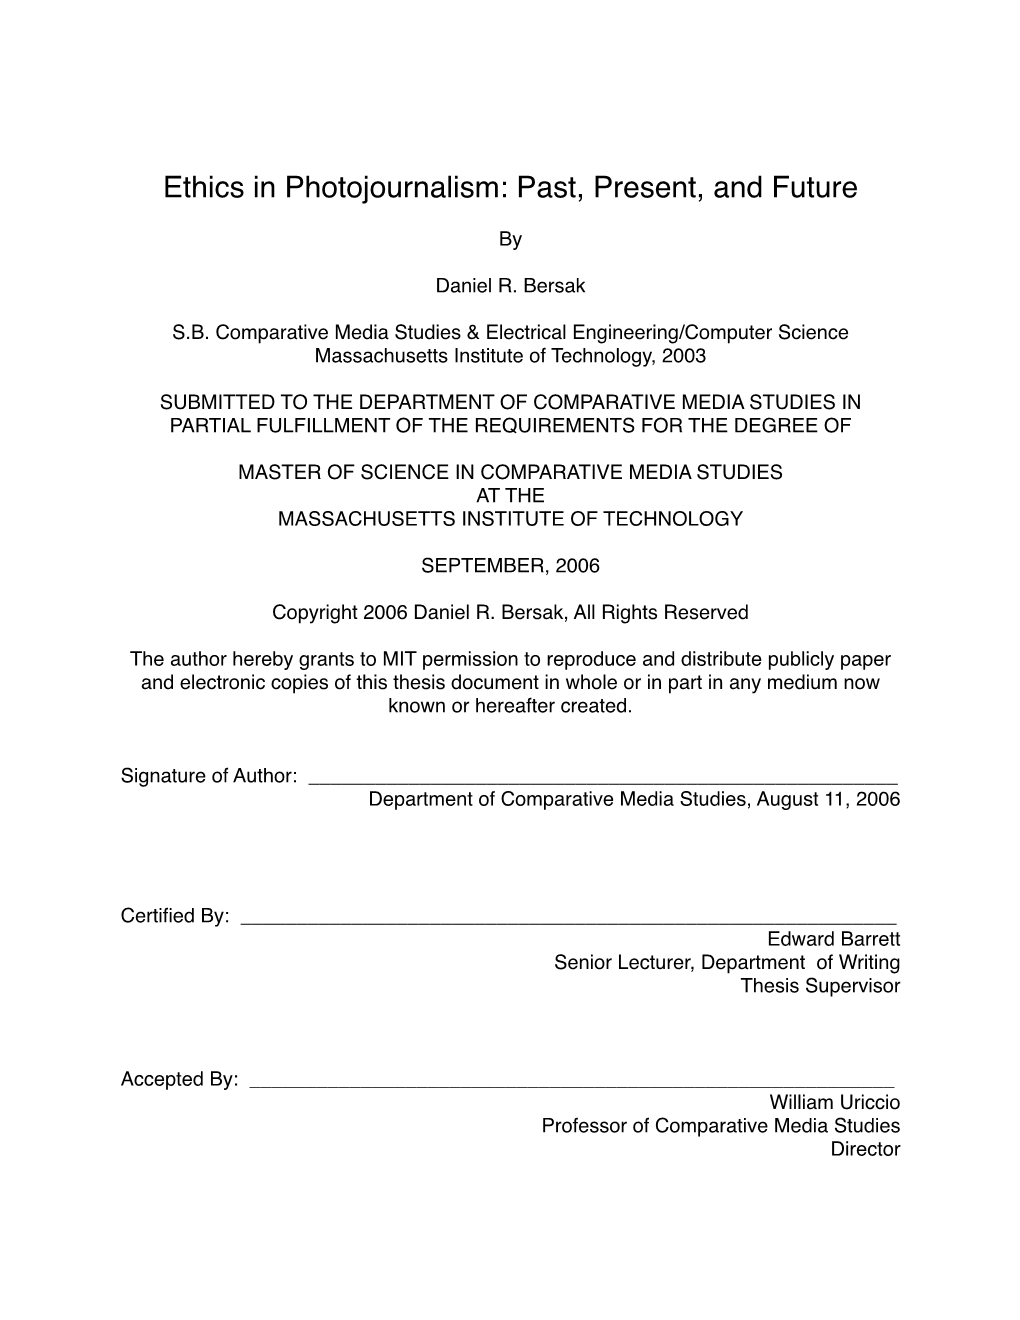 Ethics in Photojournalism: Past, Present, and Future